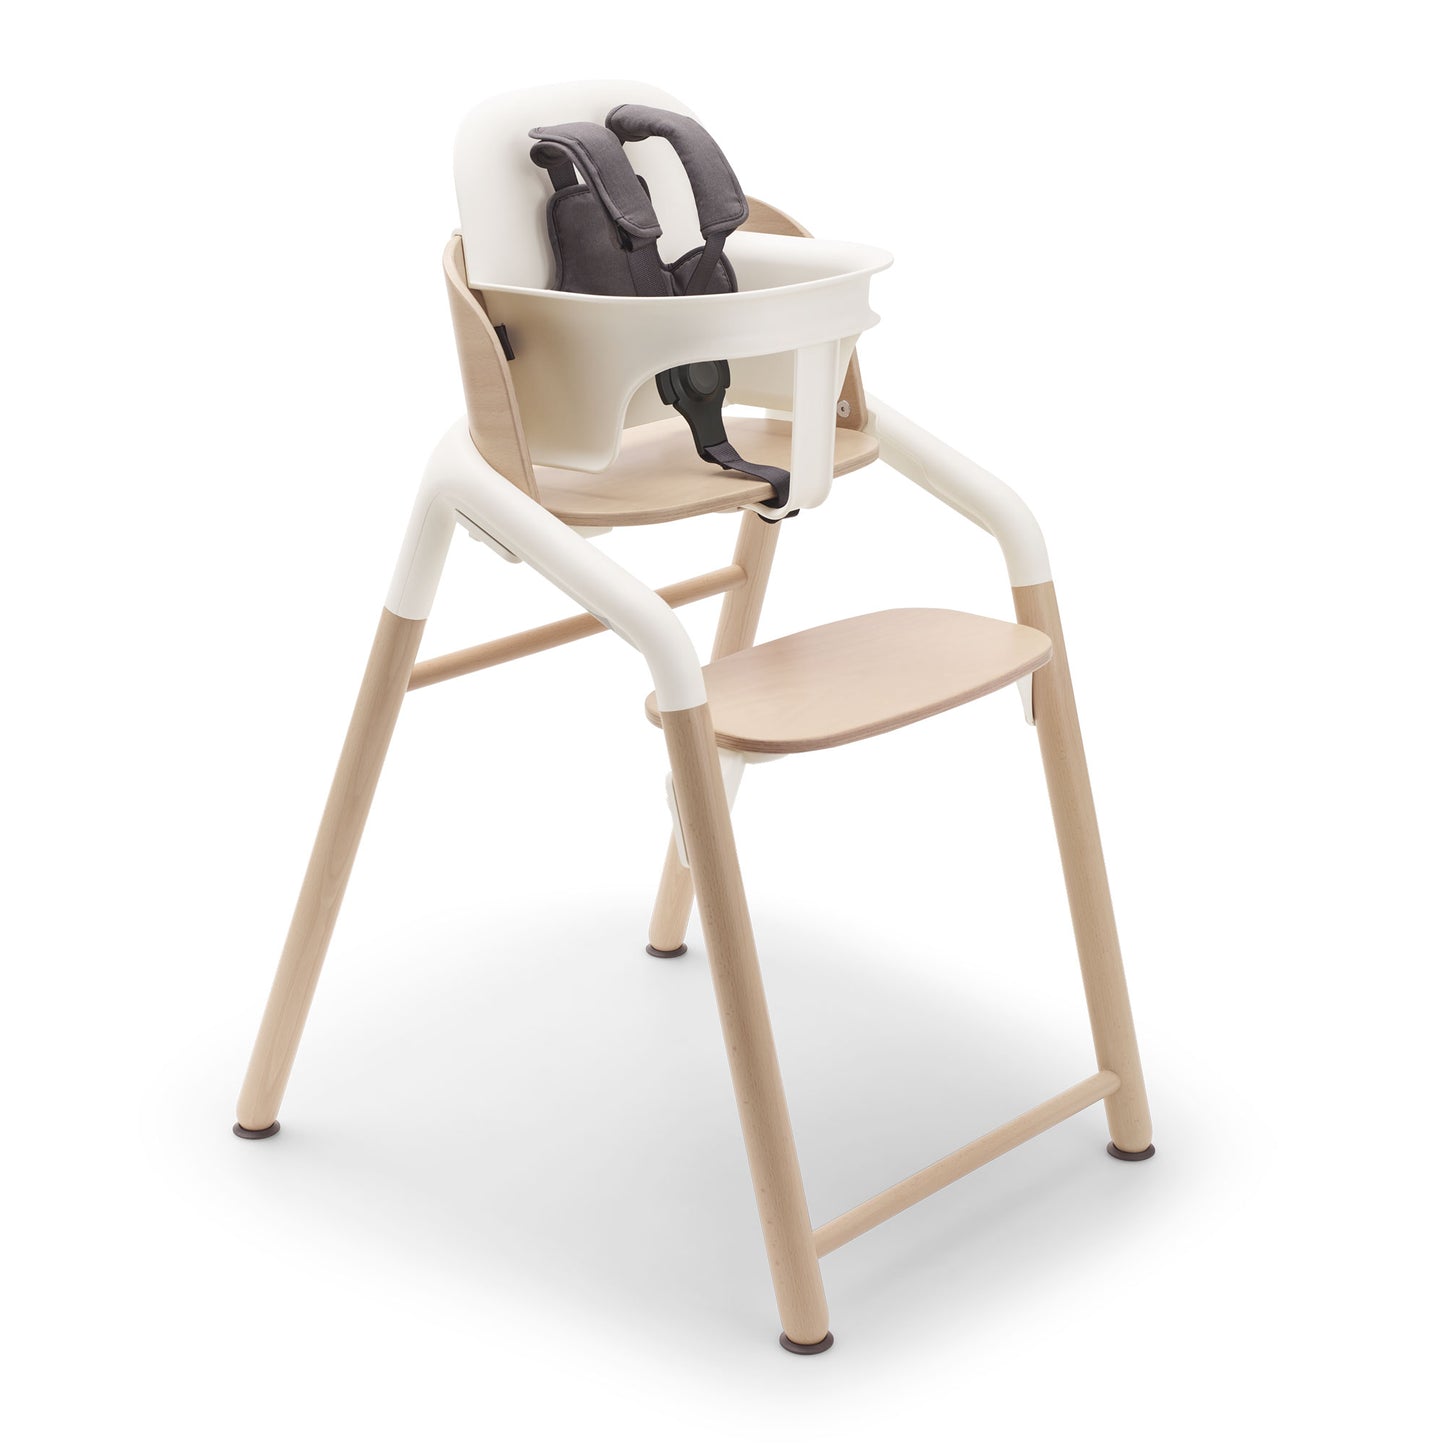 Bugaboo Giraffe High Chair Complete - Neutral Wood / White with tray removed